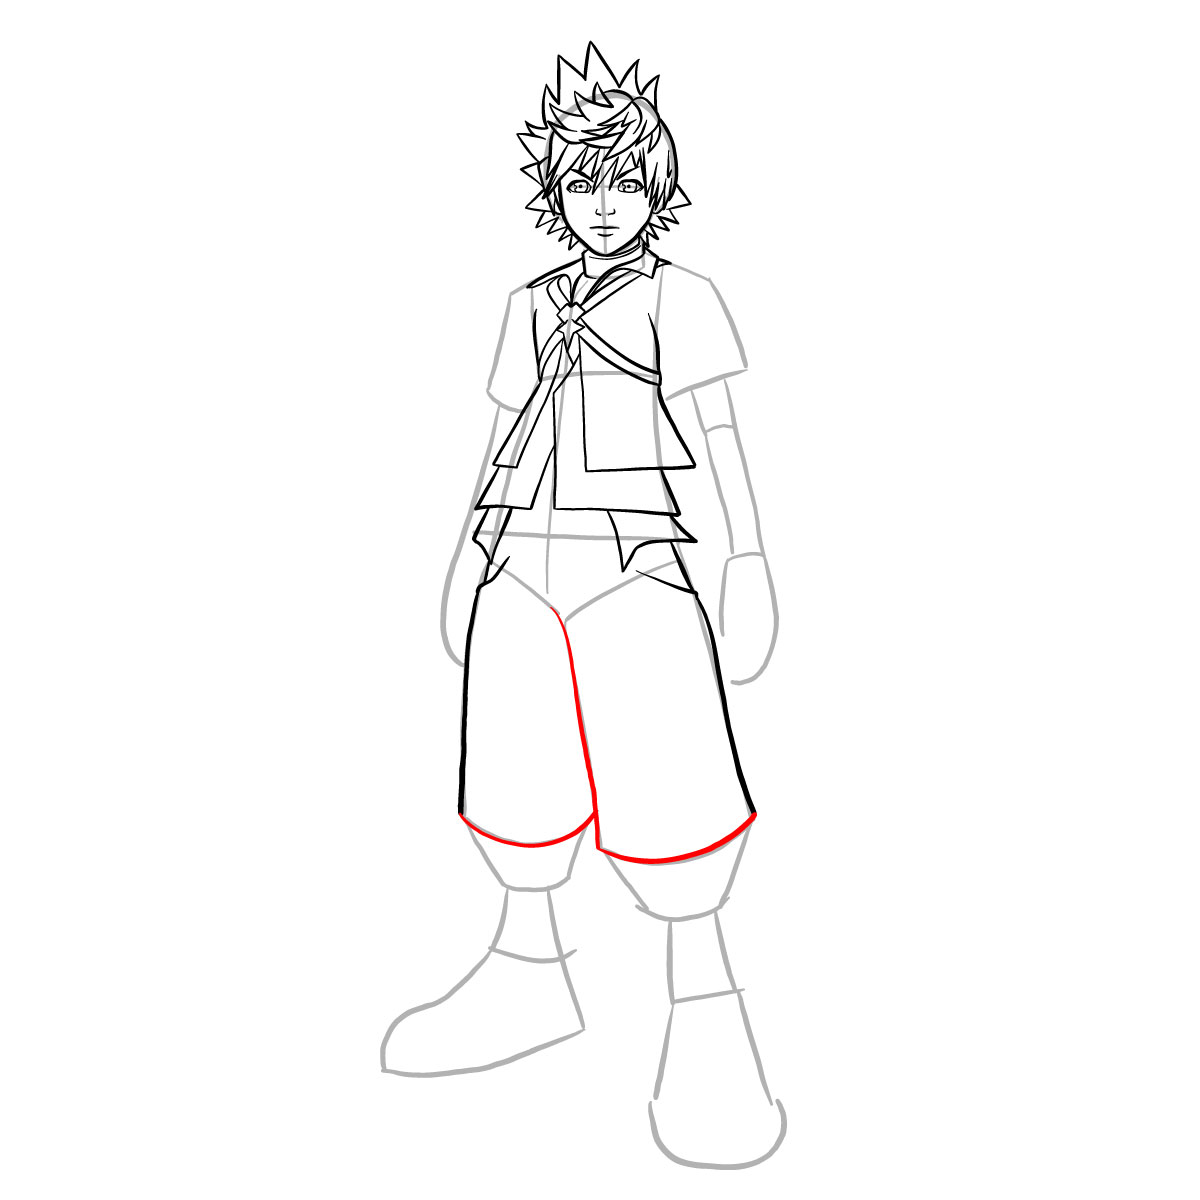 How to draw Ventus - step 25